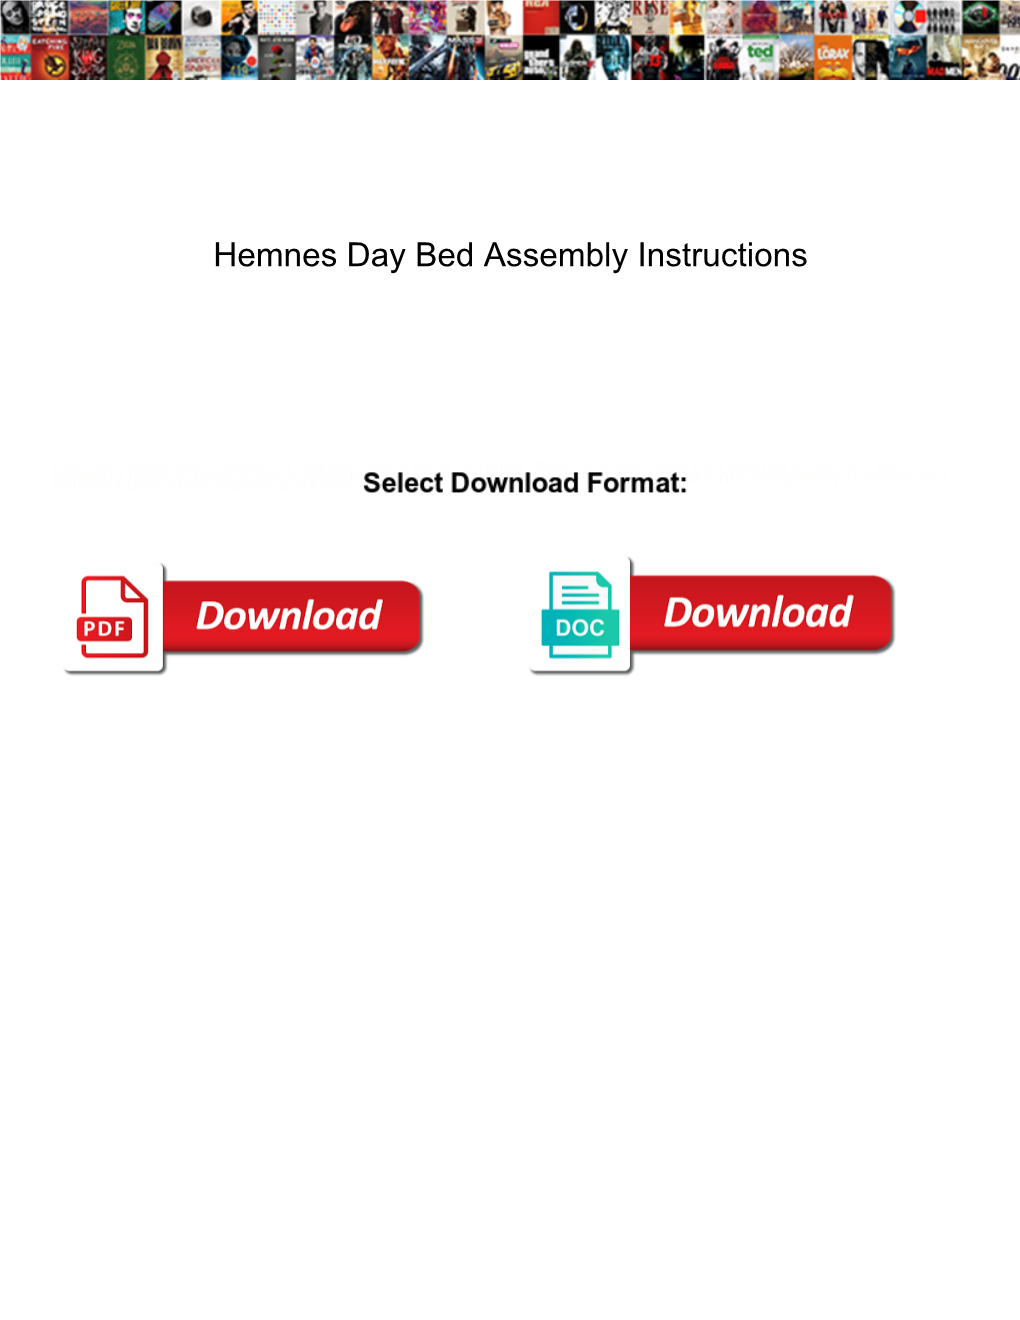 Hemnes Day Bed Assembly Instructions